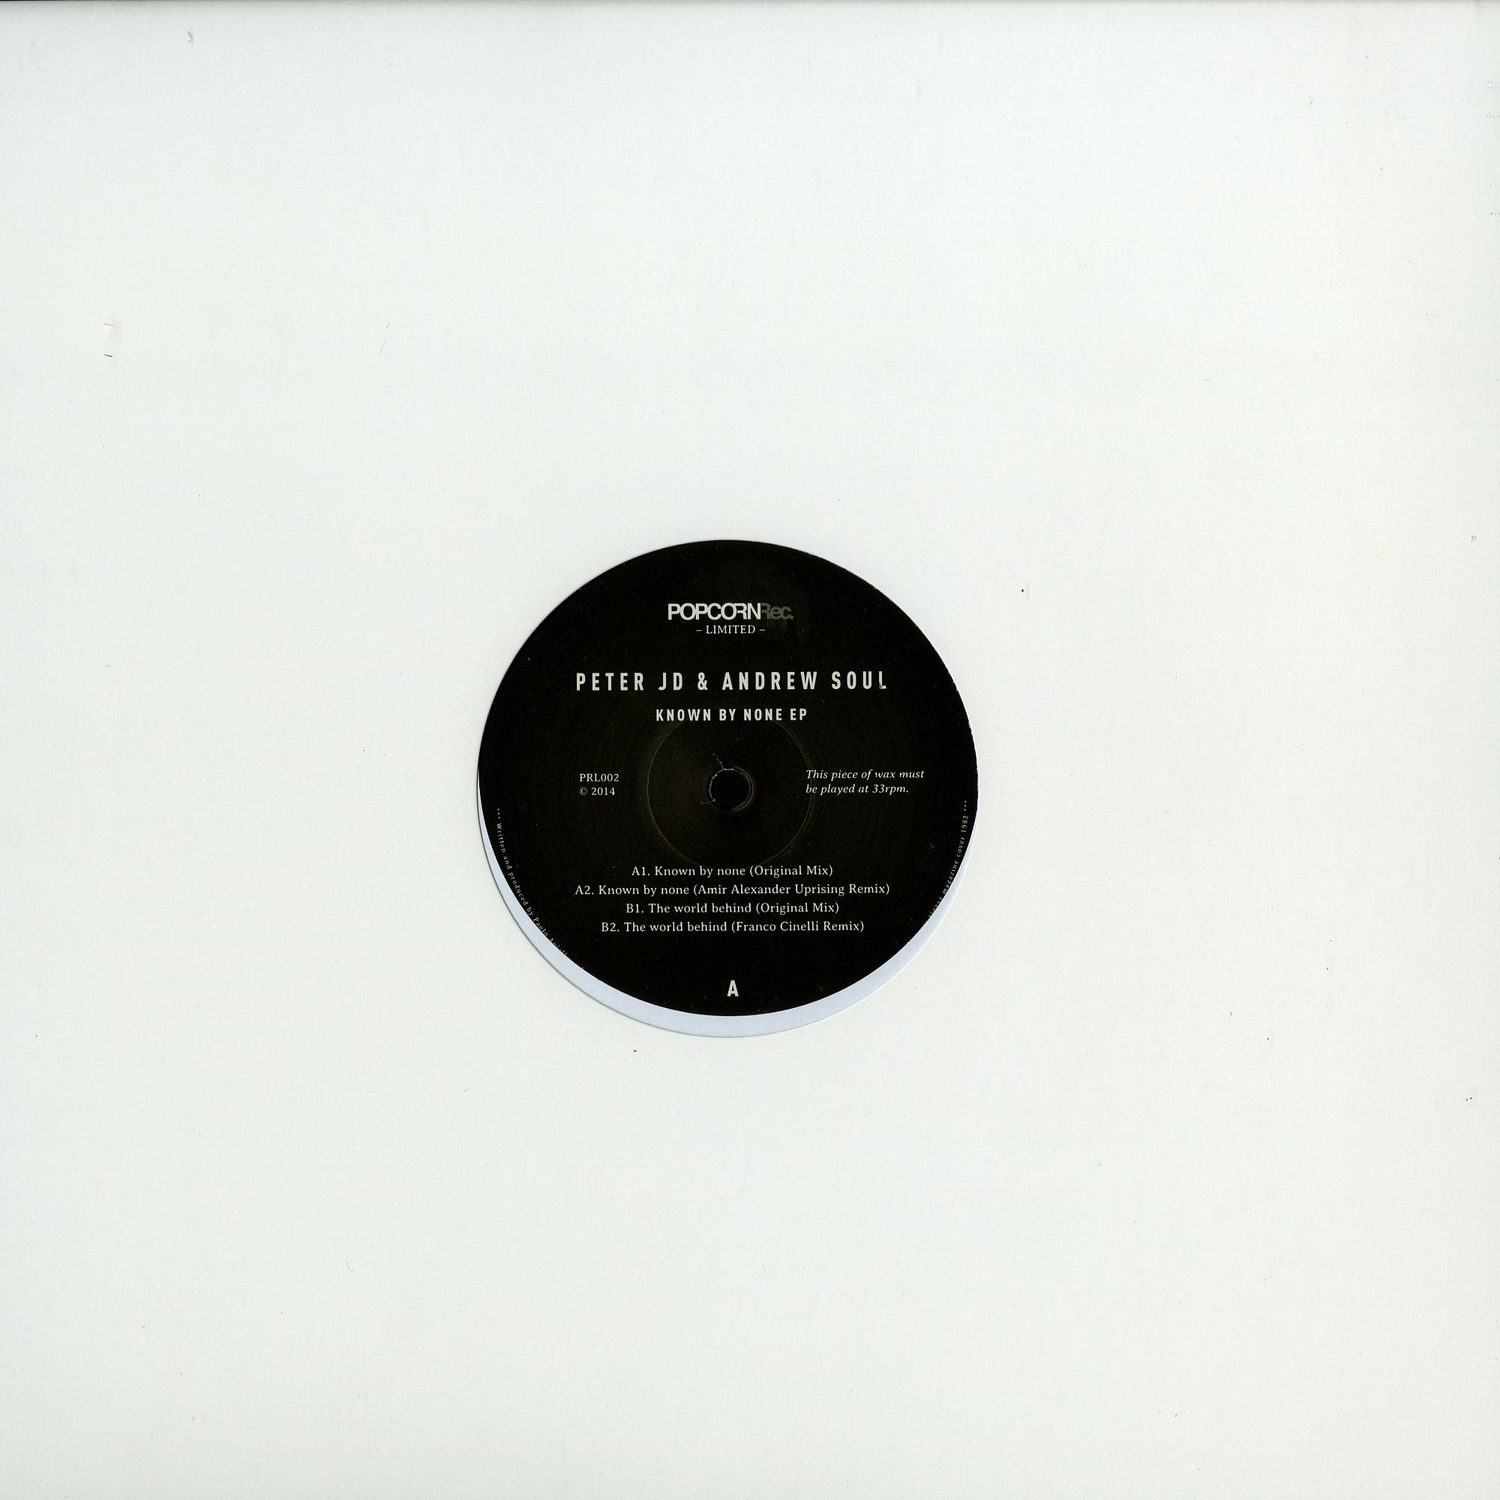 Peter JD and Andrew Soul - KNOWN BY NONE EP AMIR ALEXANDER REMIX